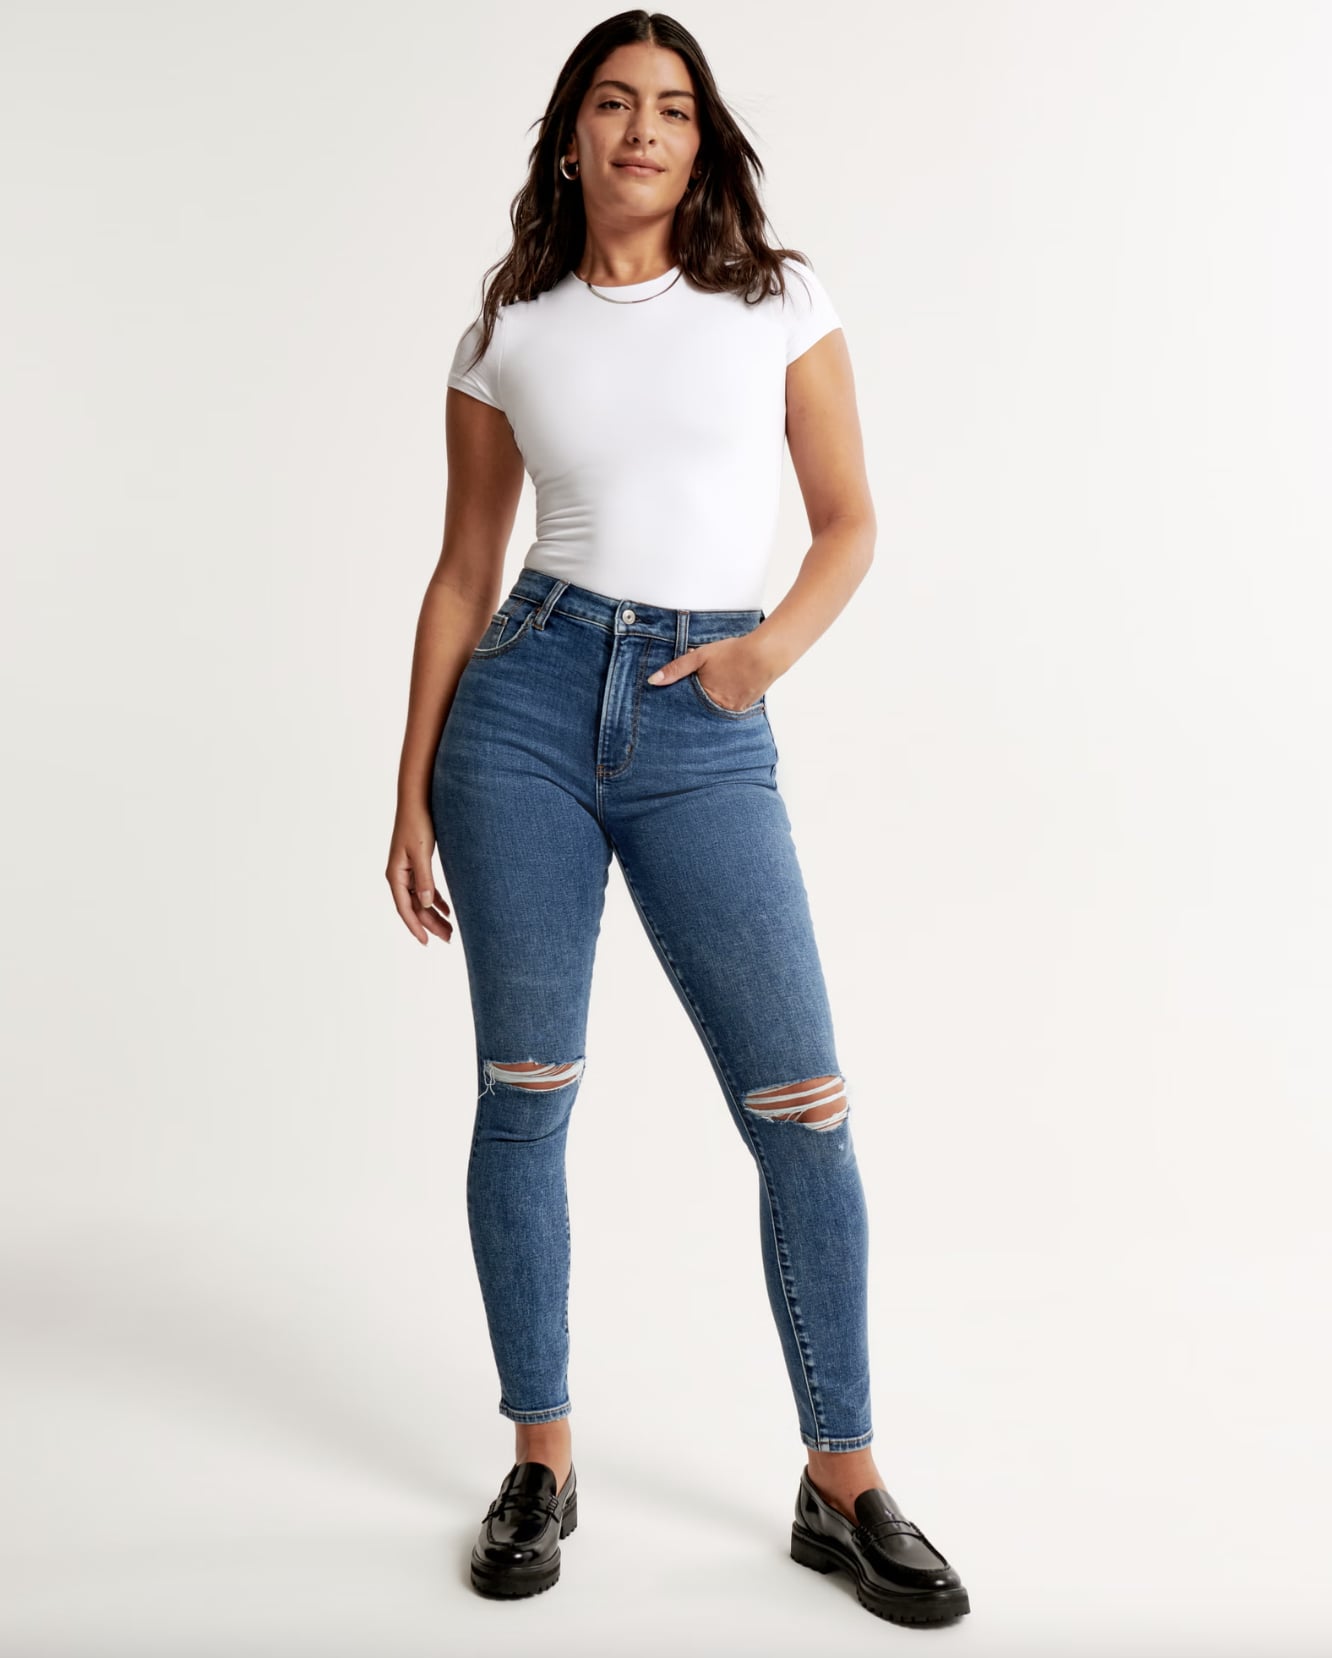 Abercrombie Jean Review  Are They Worth The Hype? - Strawberry Chic